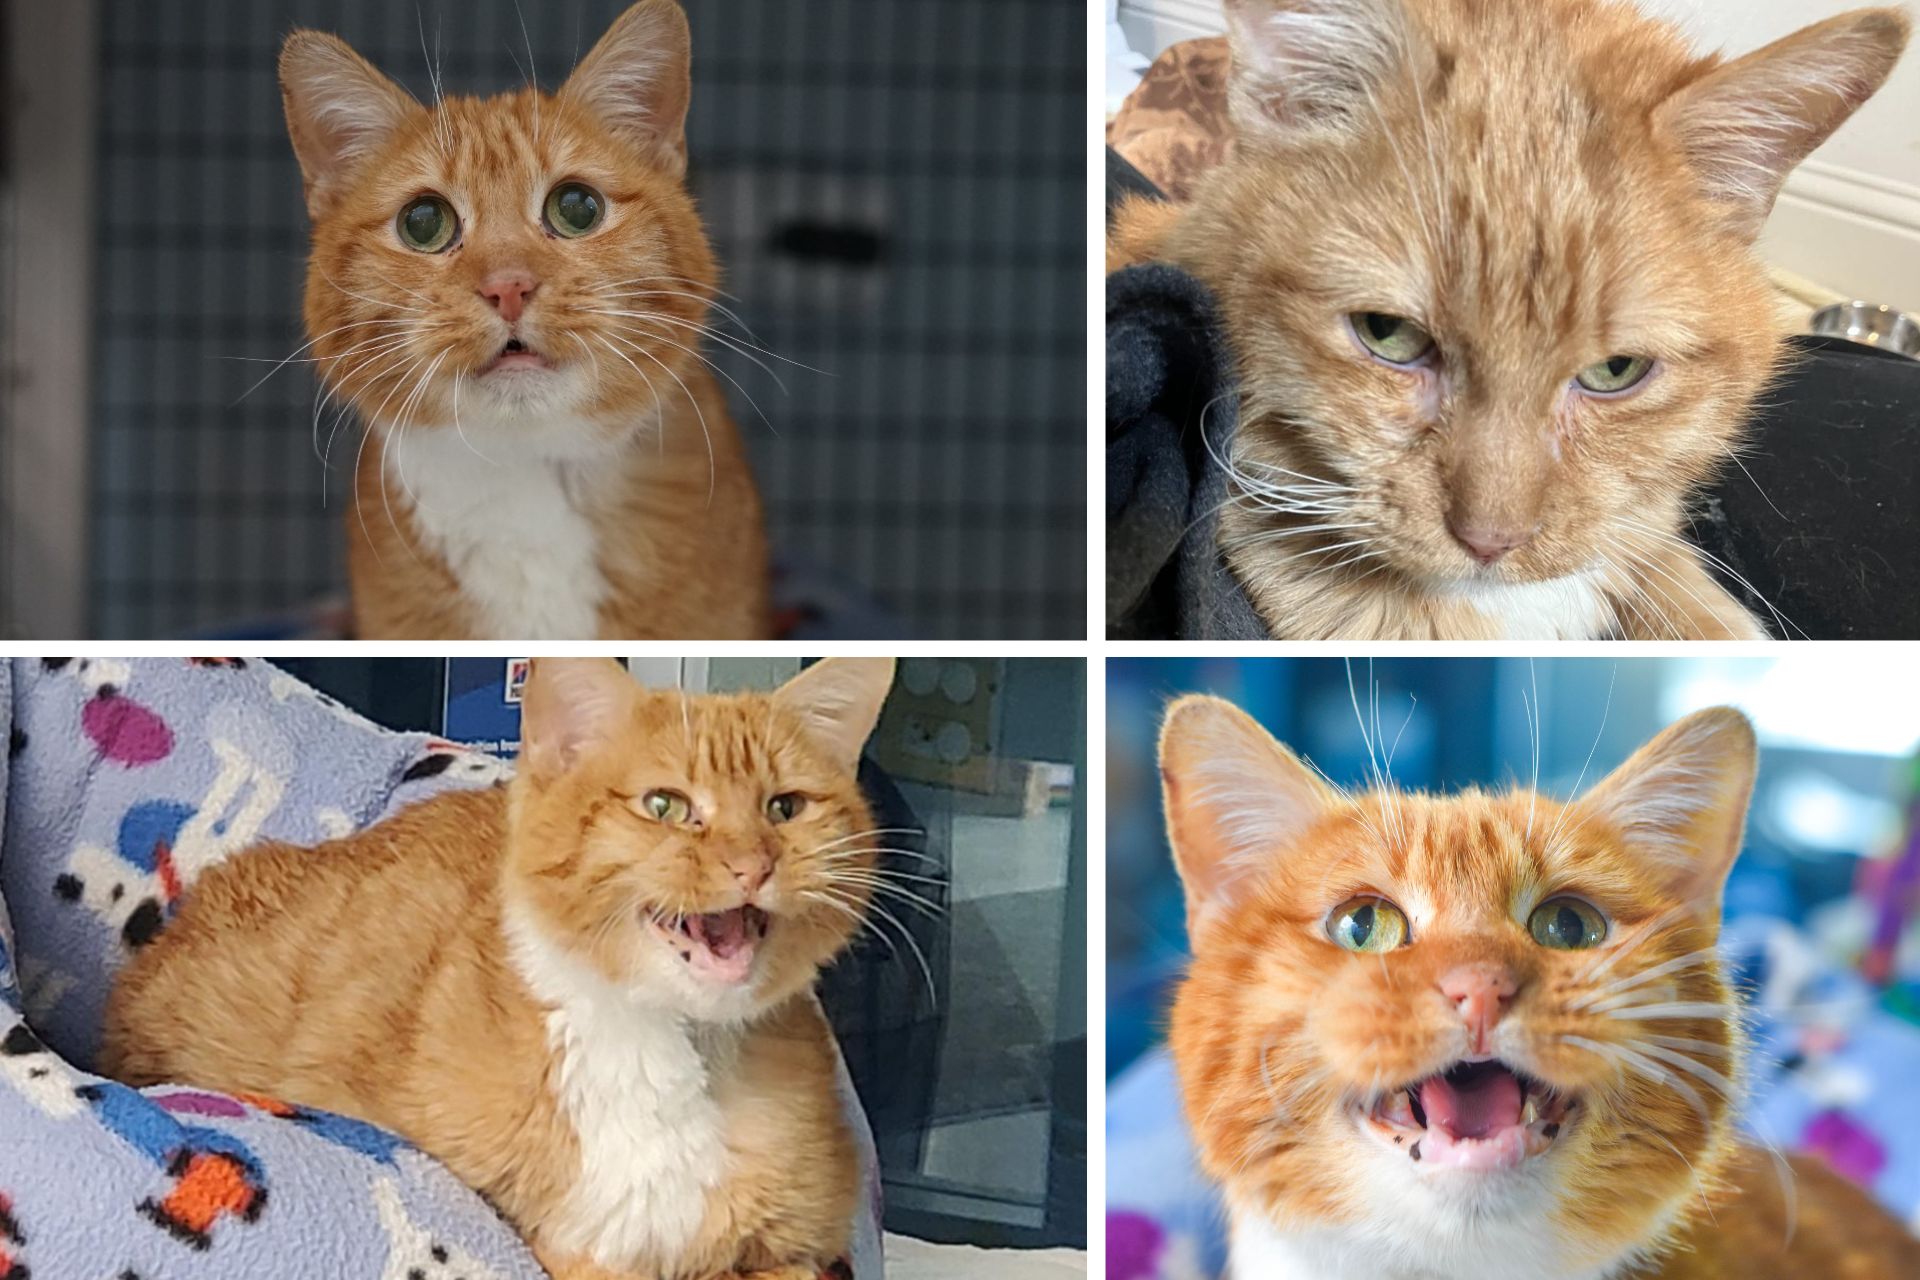 A photo collage of an orange cat named Boots.